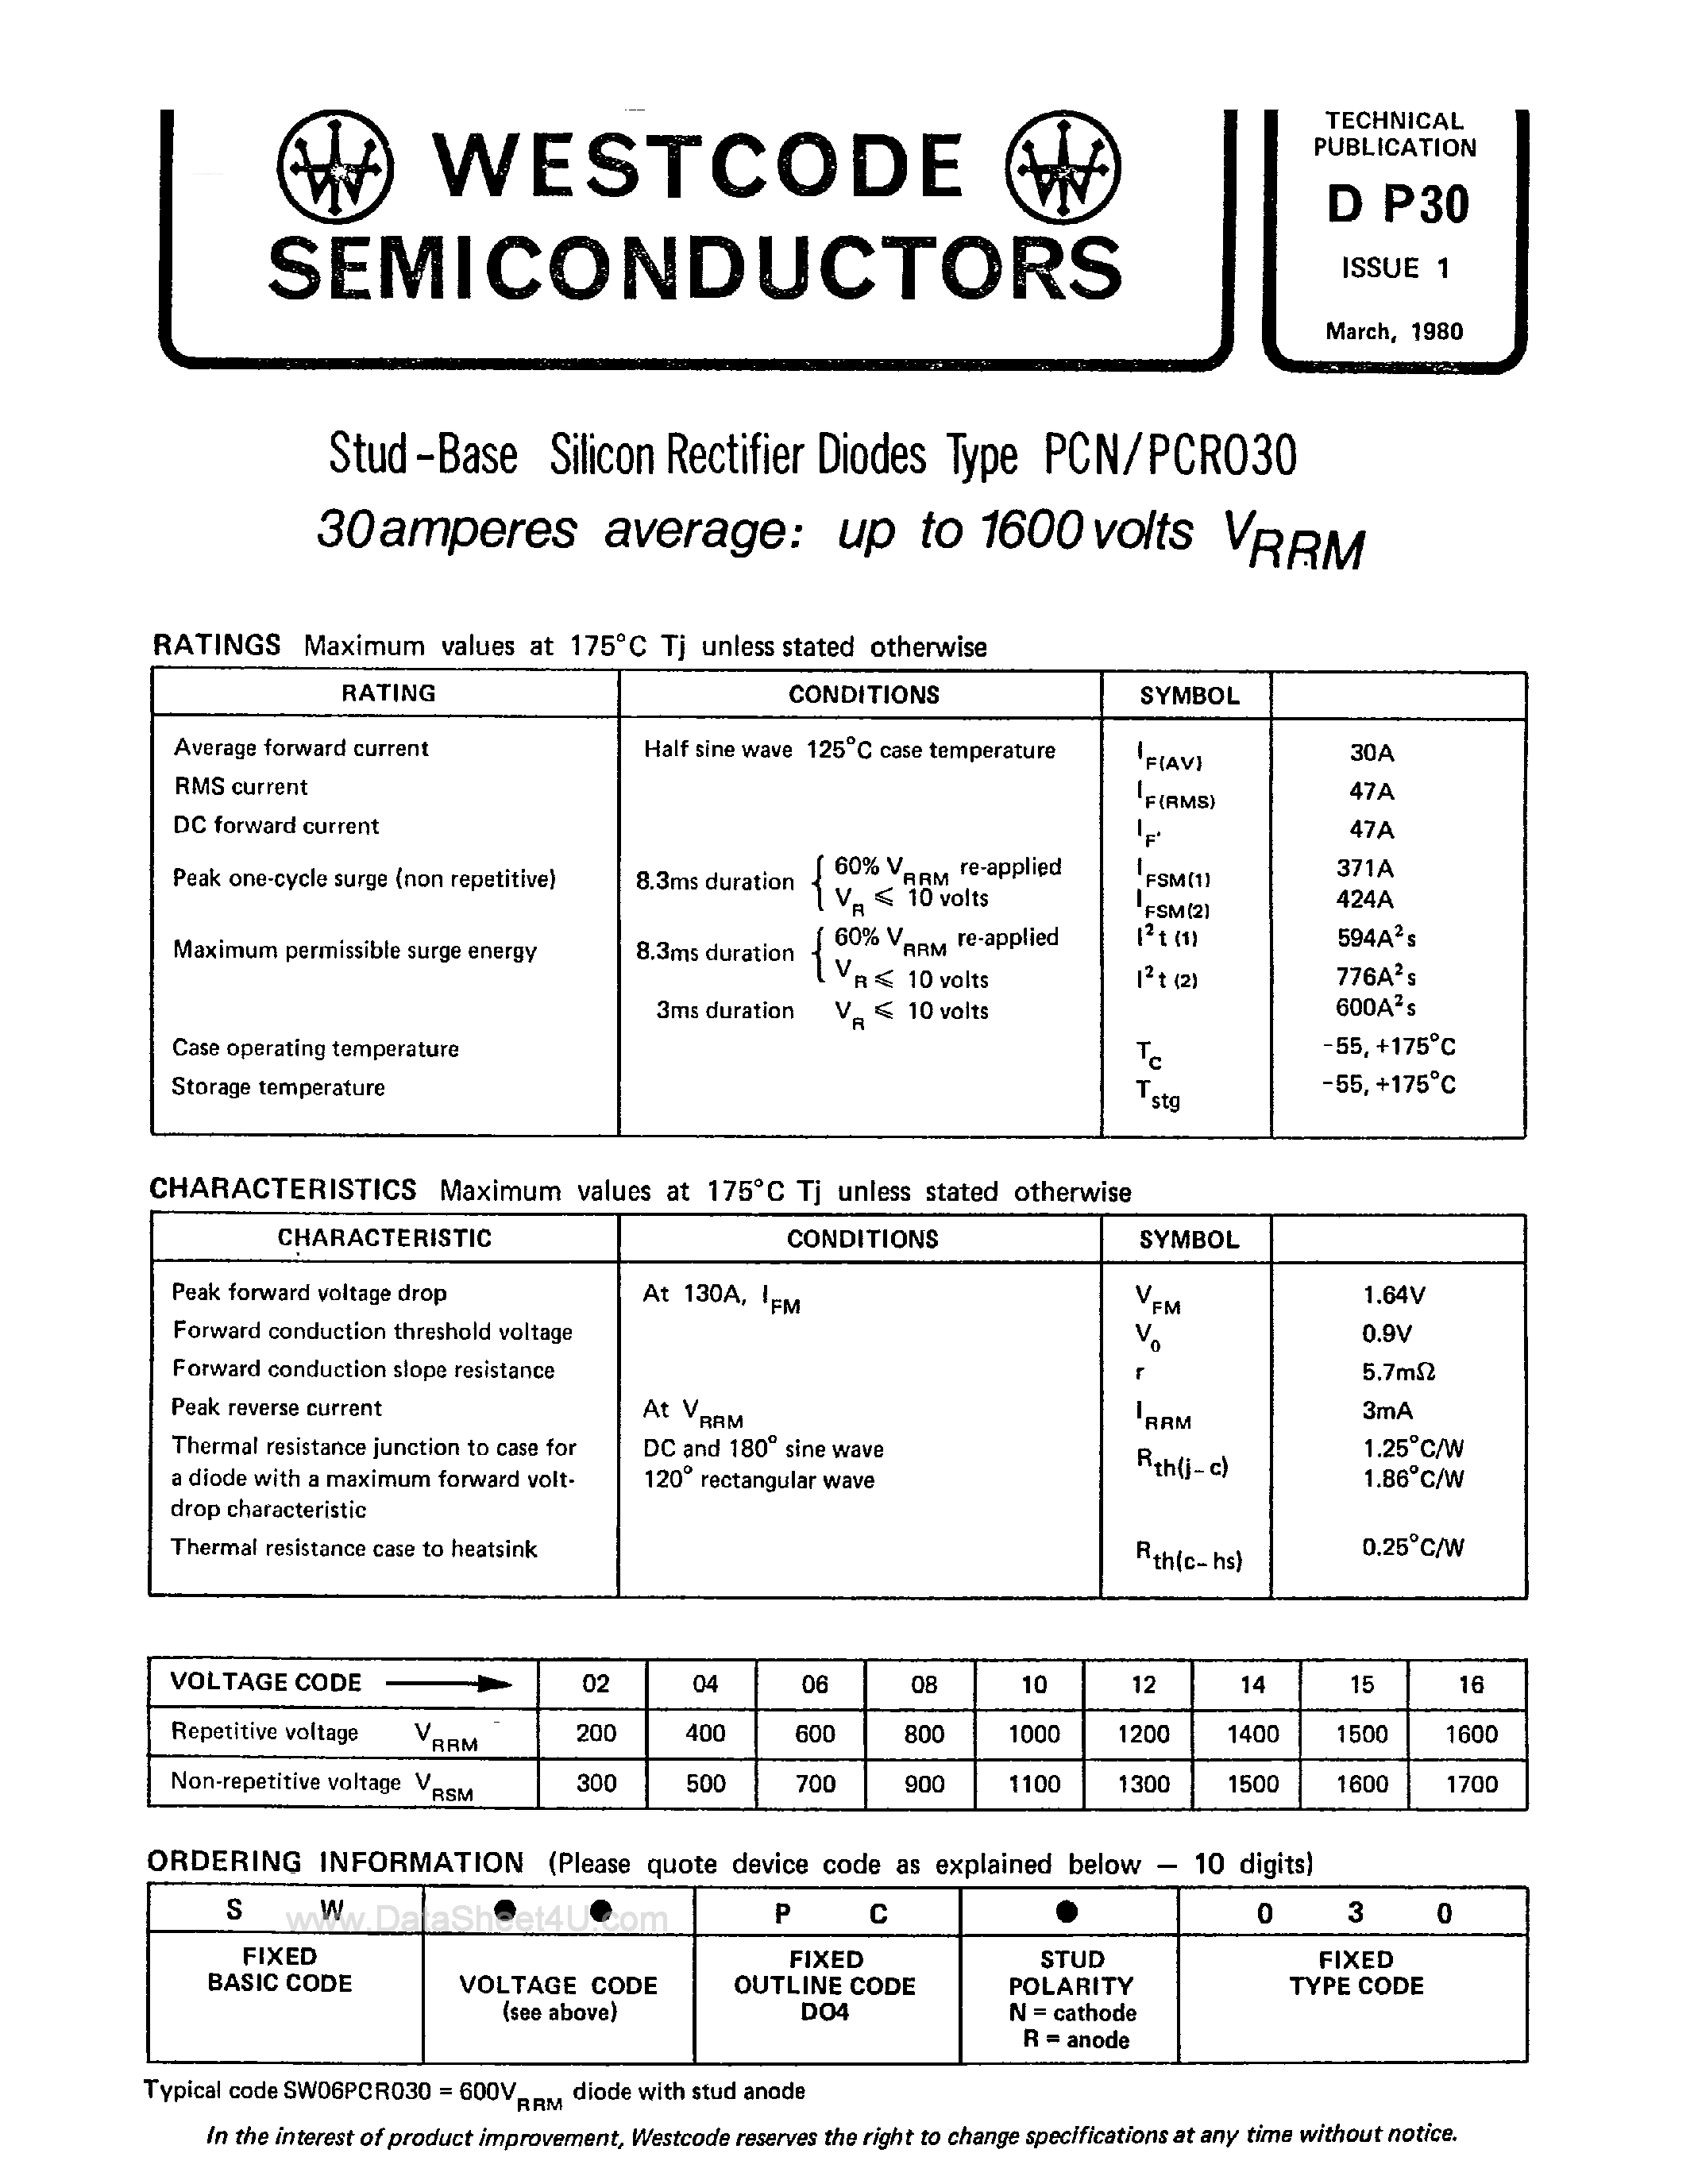 Datasheet SW15PCN030 - Stud Base Silicon Rectifier Diodes page 1